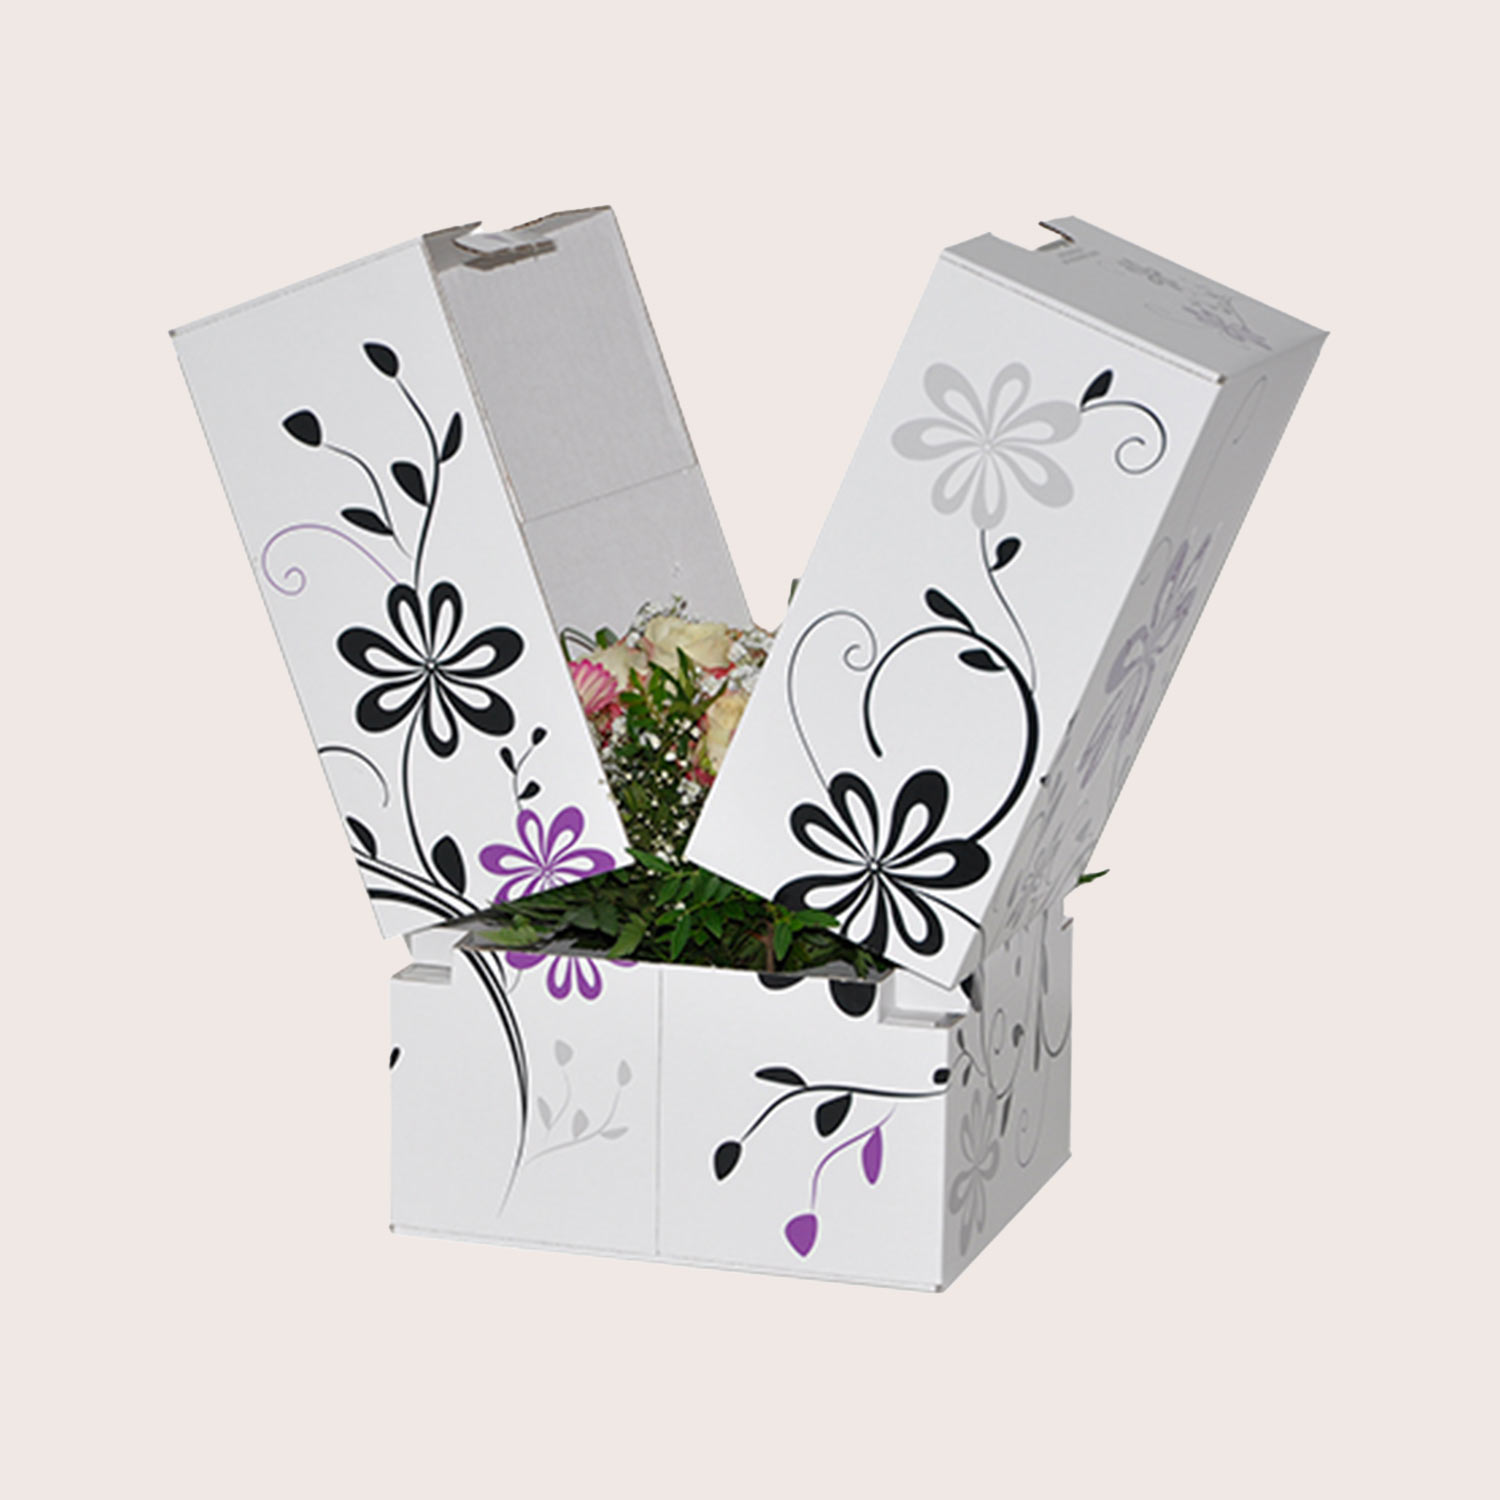 Flower packaging from THIMM